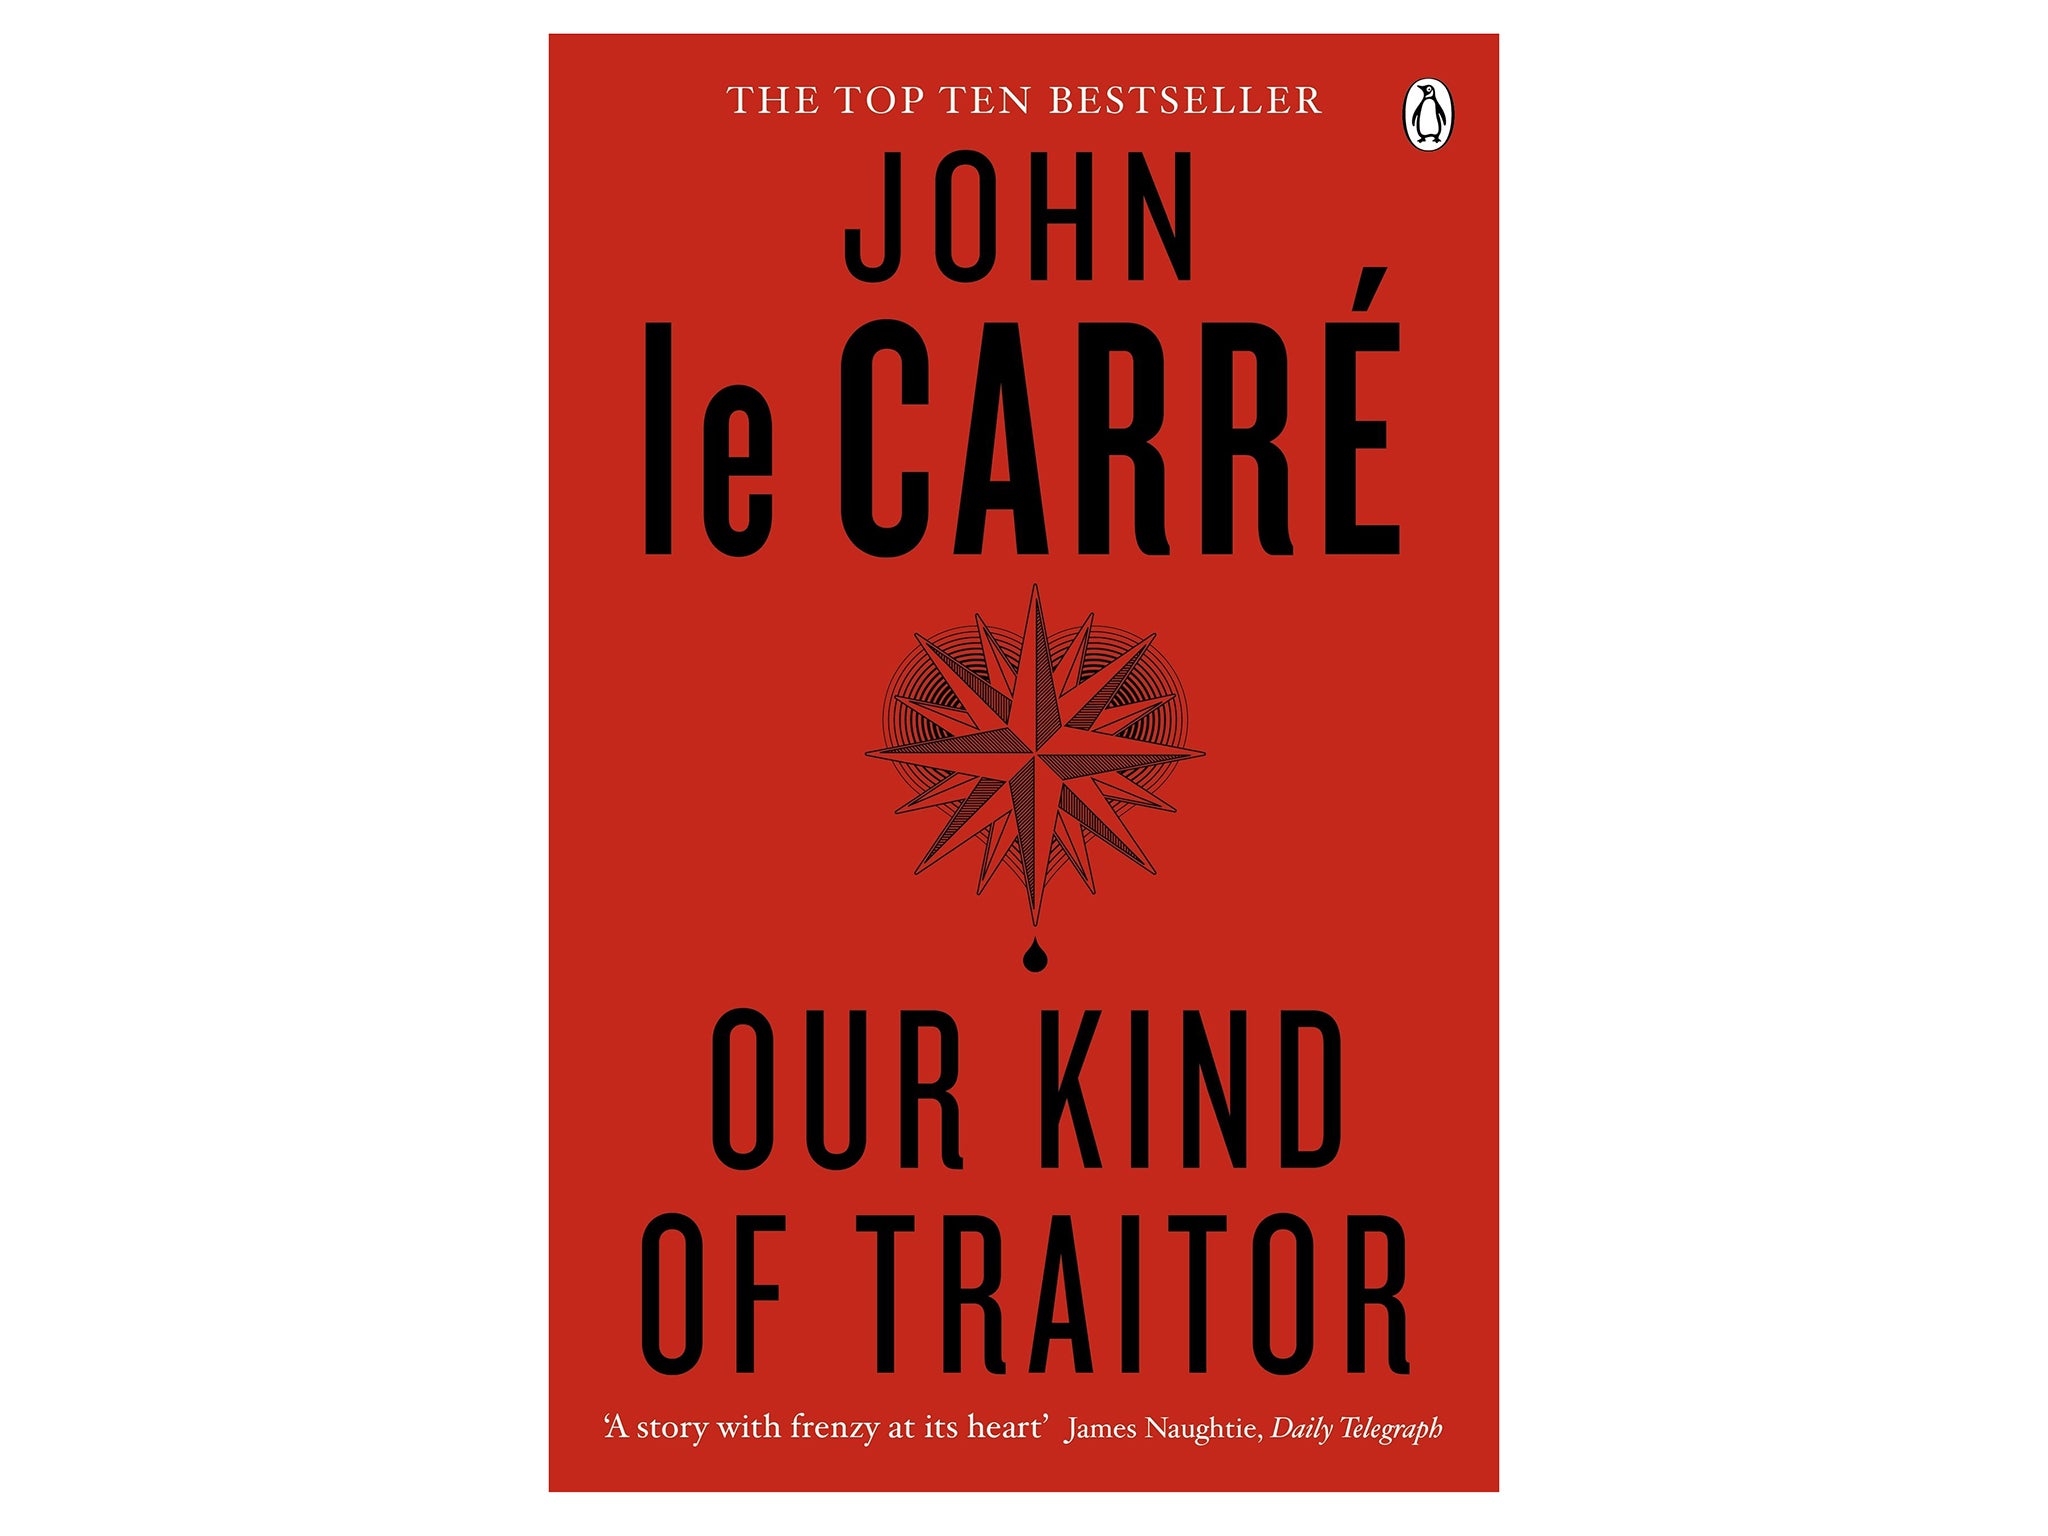 our-kind-of-traitor-john-le-carre-indybest.jpg